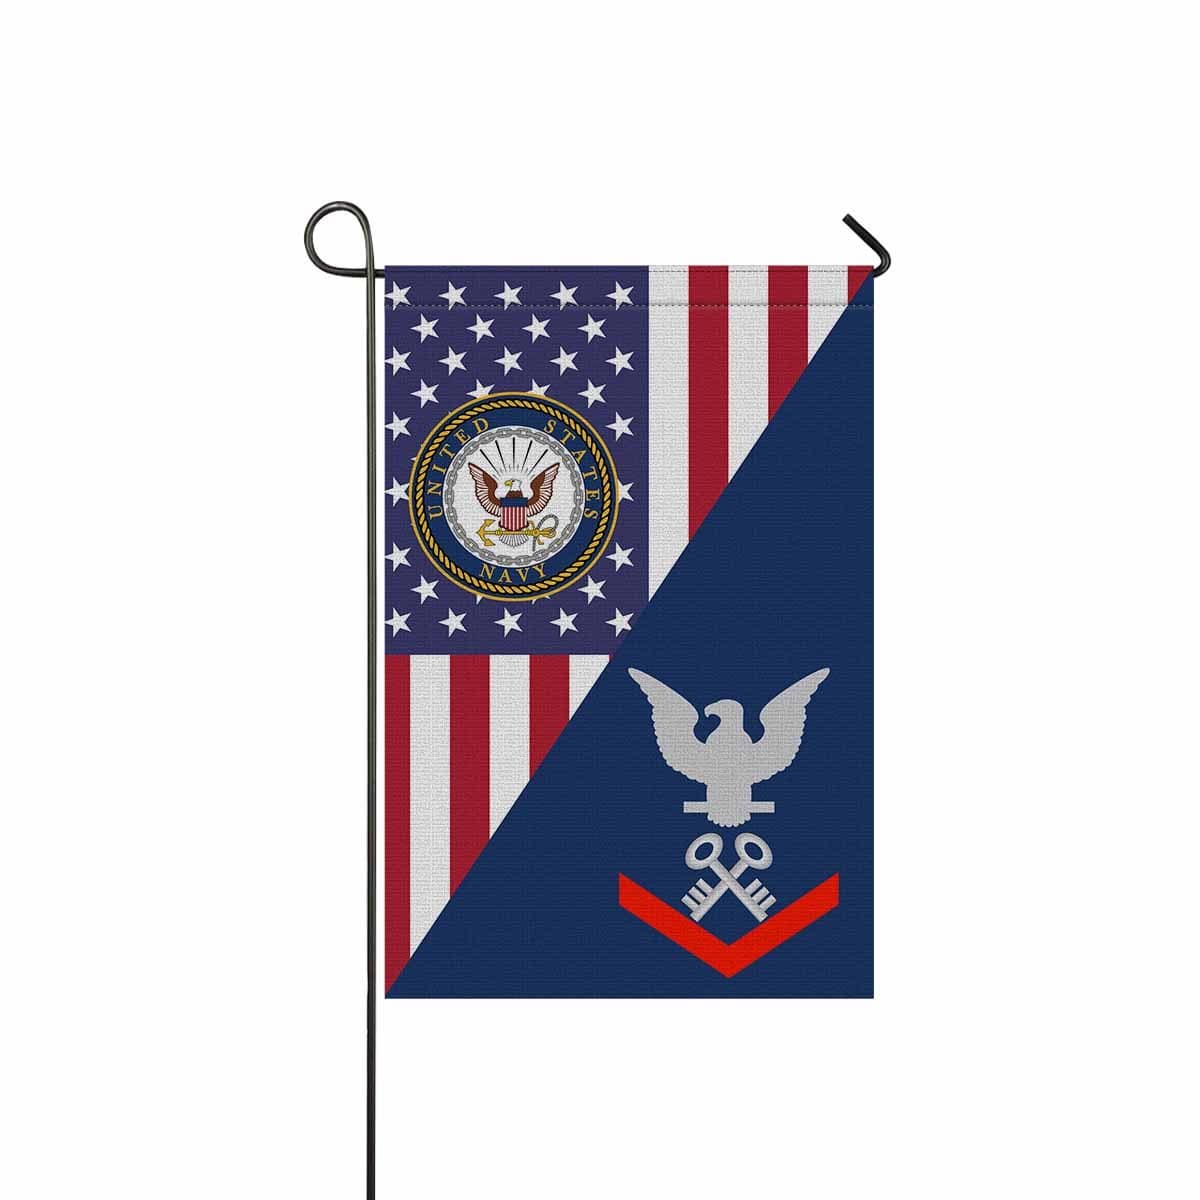 Navy Storekeeper Navy SK E-4 Garden Flag/Yard Flag 12 inches x 18 inches Twin-Side Printing-GDFlag-Navy-Rating-Veterans Nation